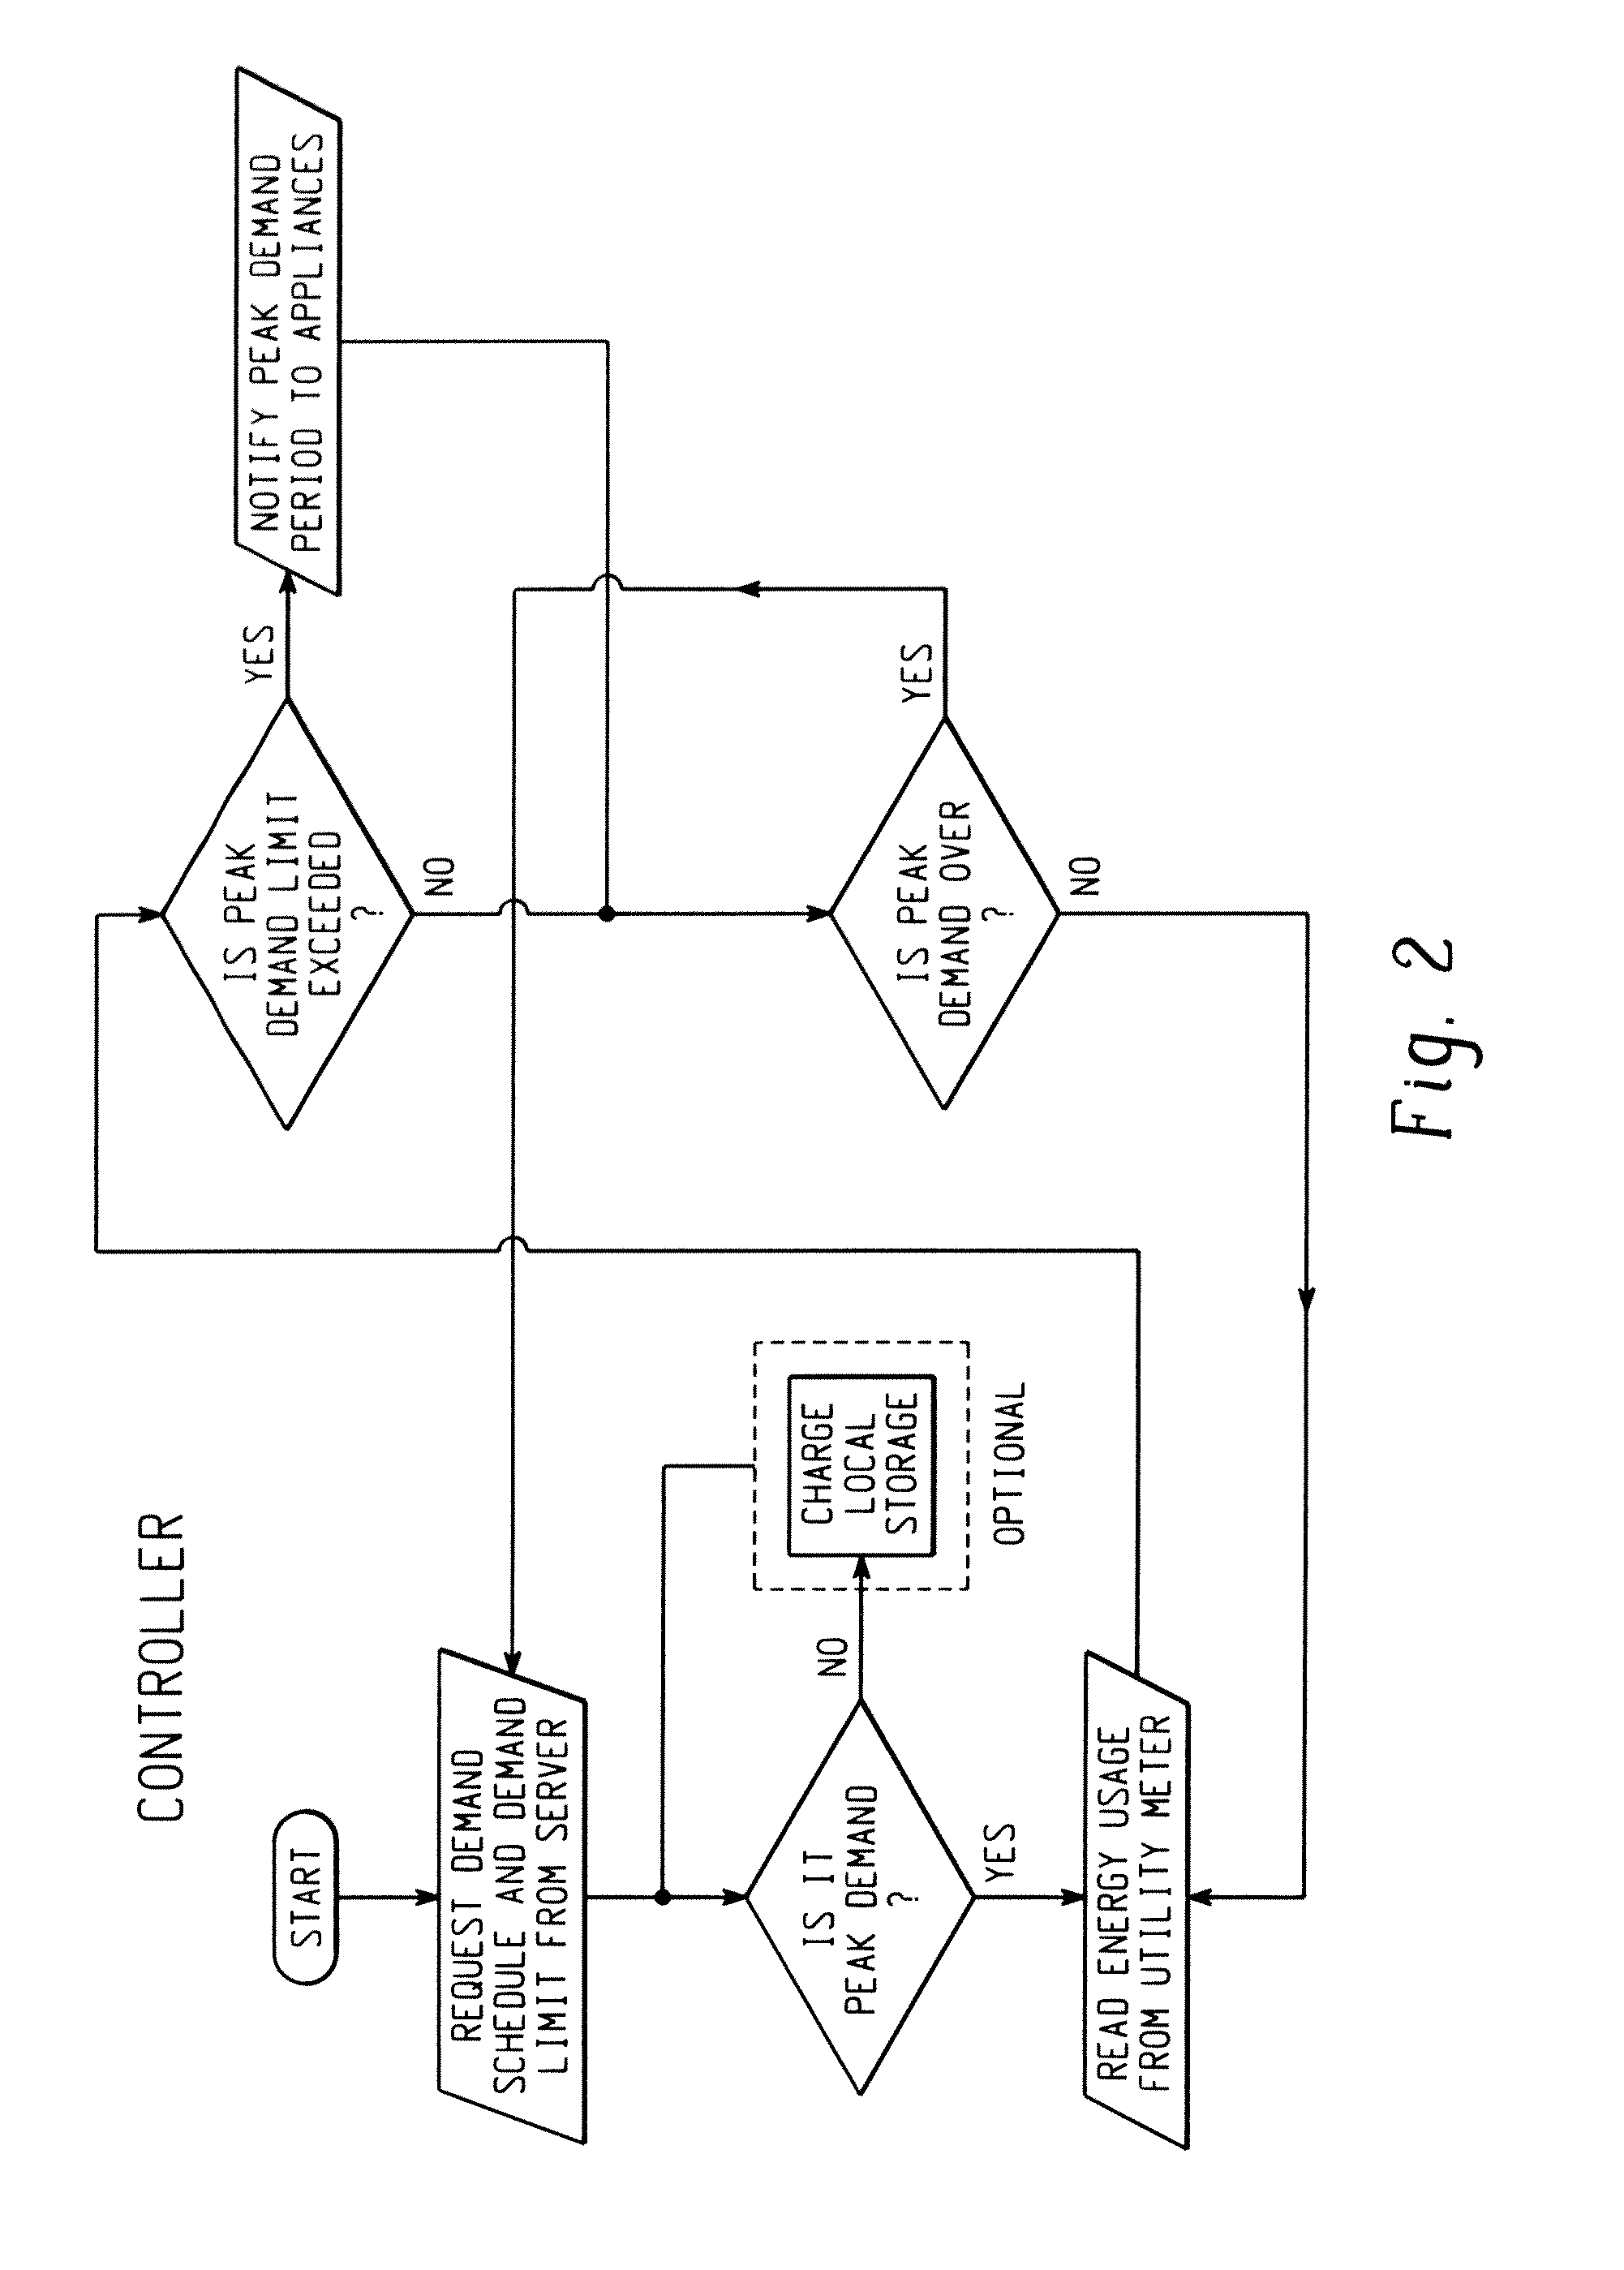 System for reduced peak power consumption by a cooking appliance